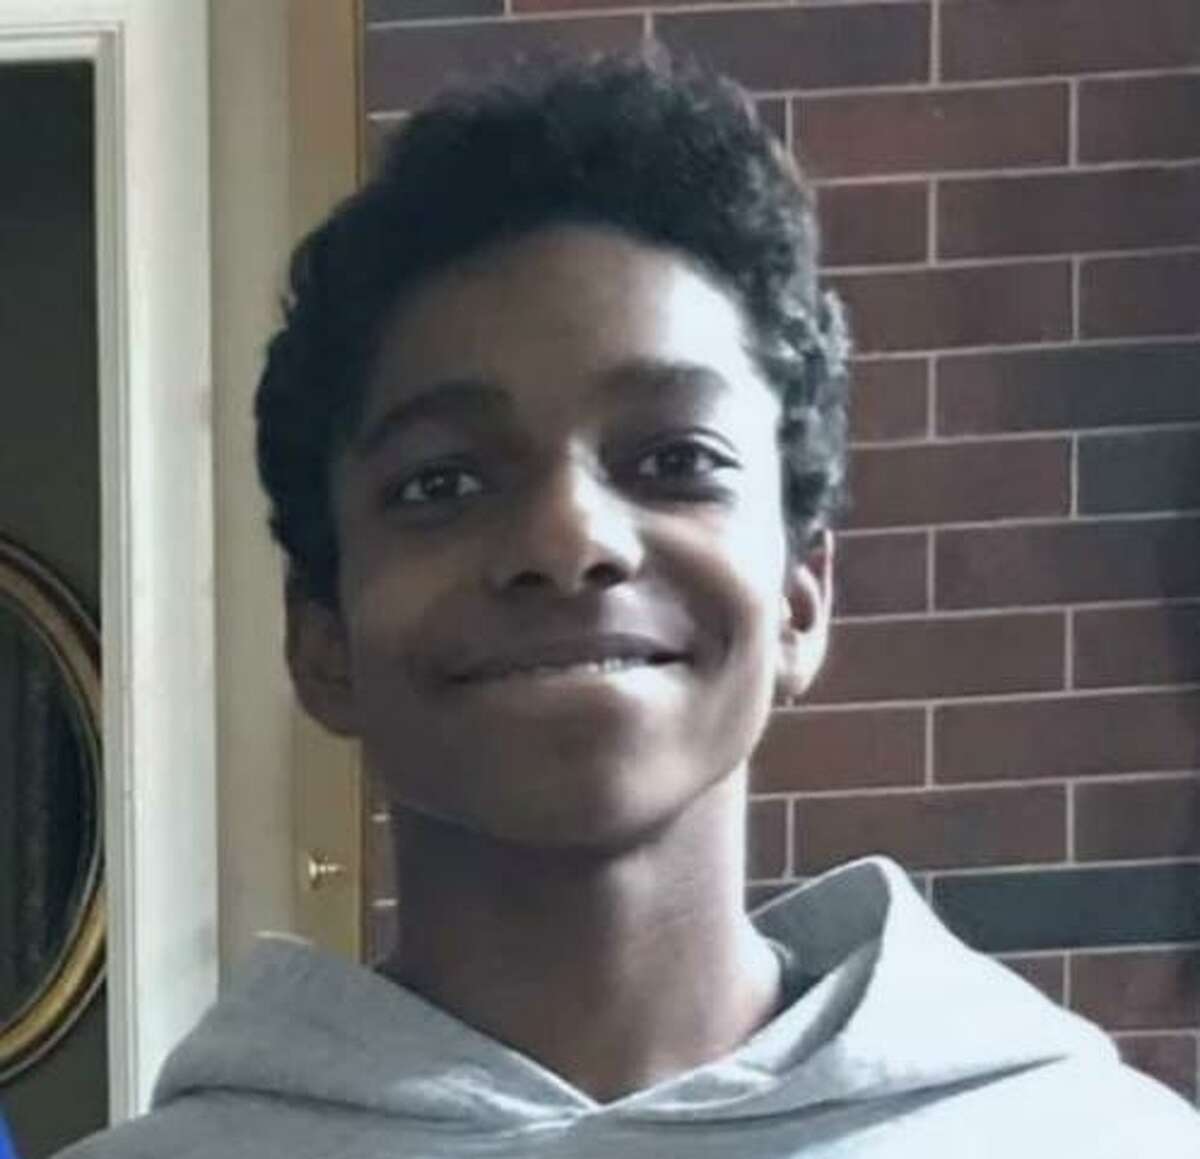 Johnathan “Johnny” Adams, 14, of West Hartford, was killed by his cousin in 2020 while staying with family in West Virginia.